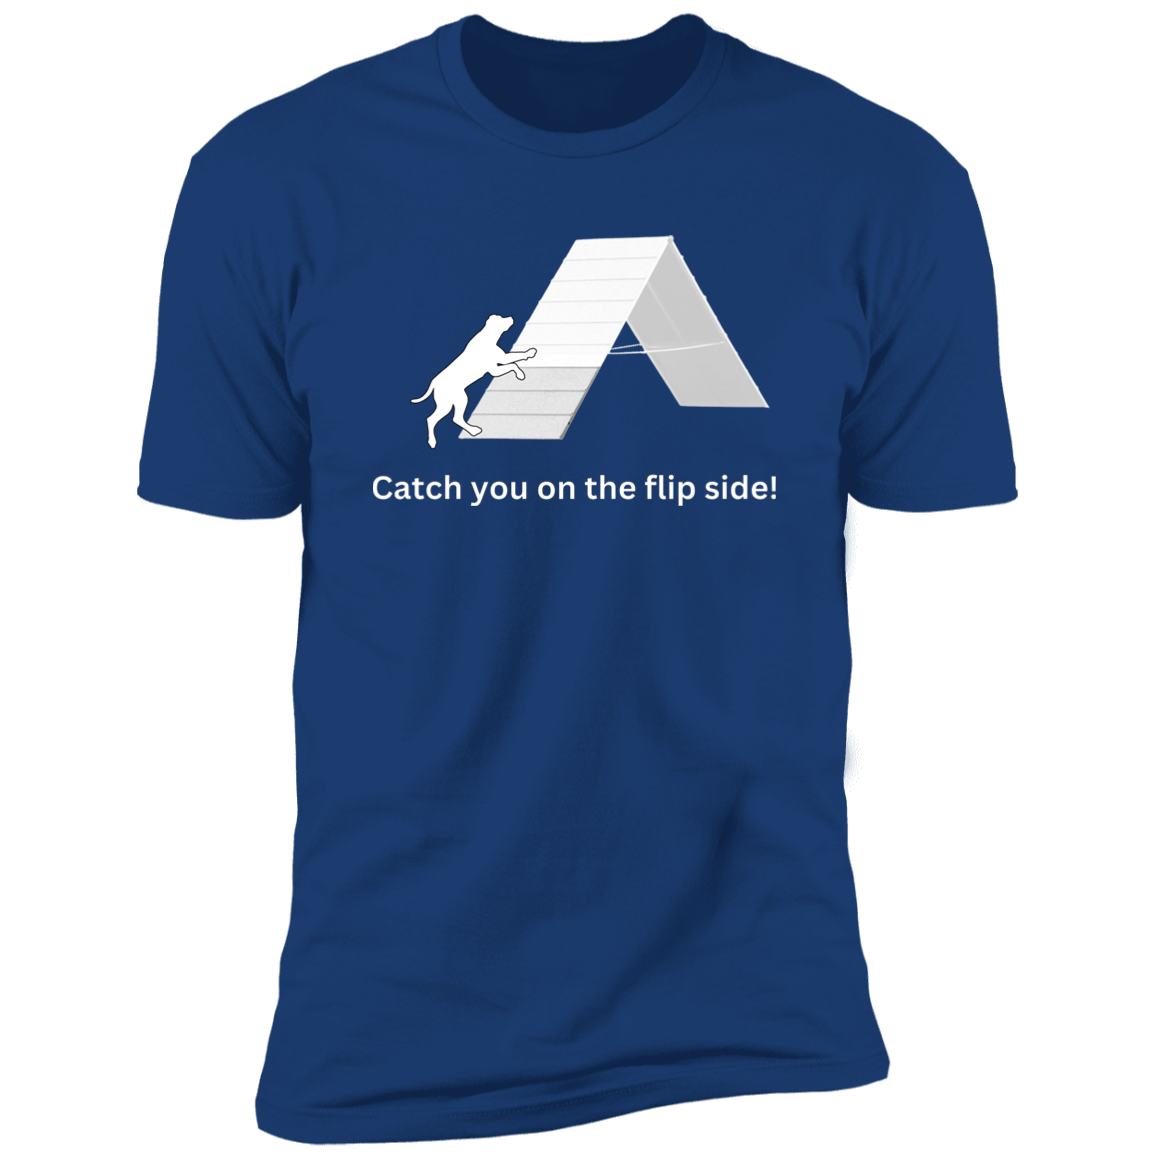 Catch You on the Flip Side T-shirt, Dog Agility Shirt for humans, in royal blue